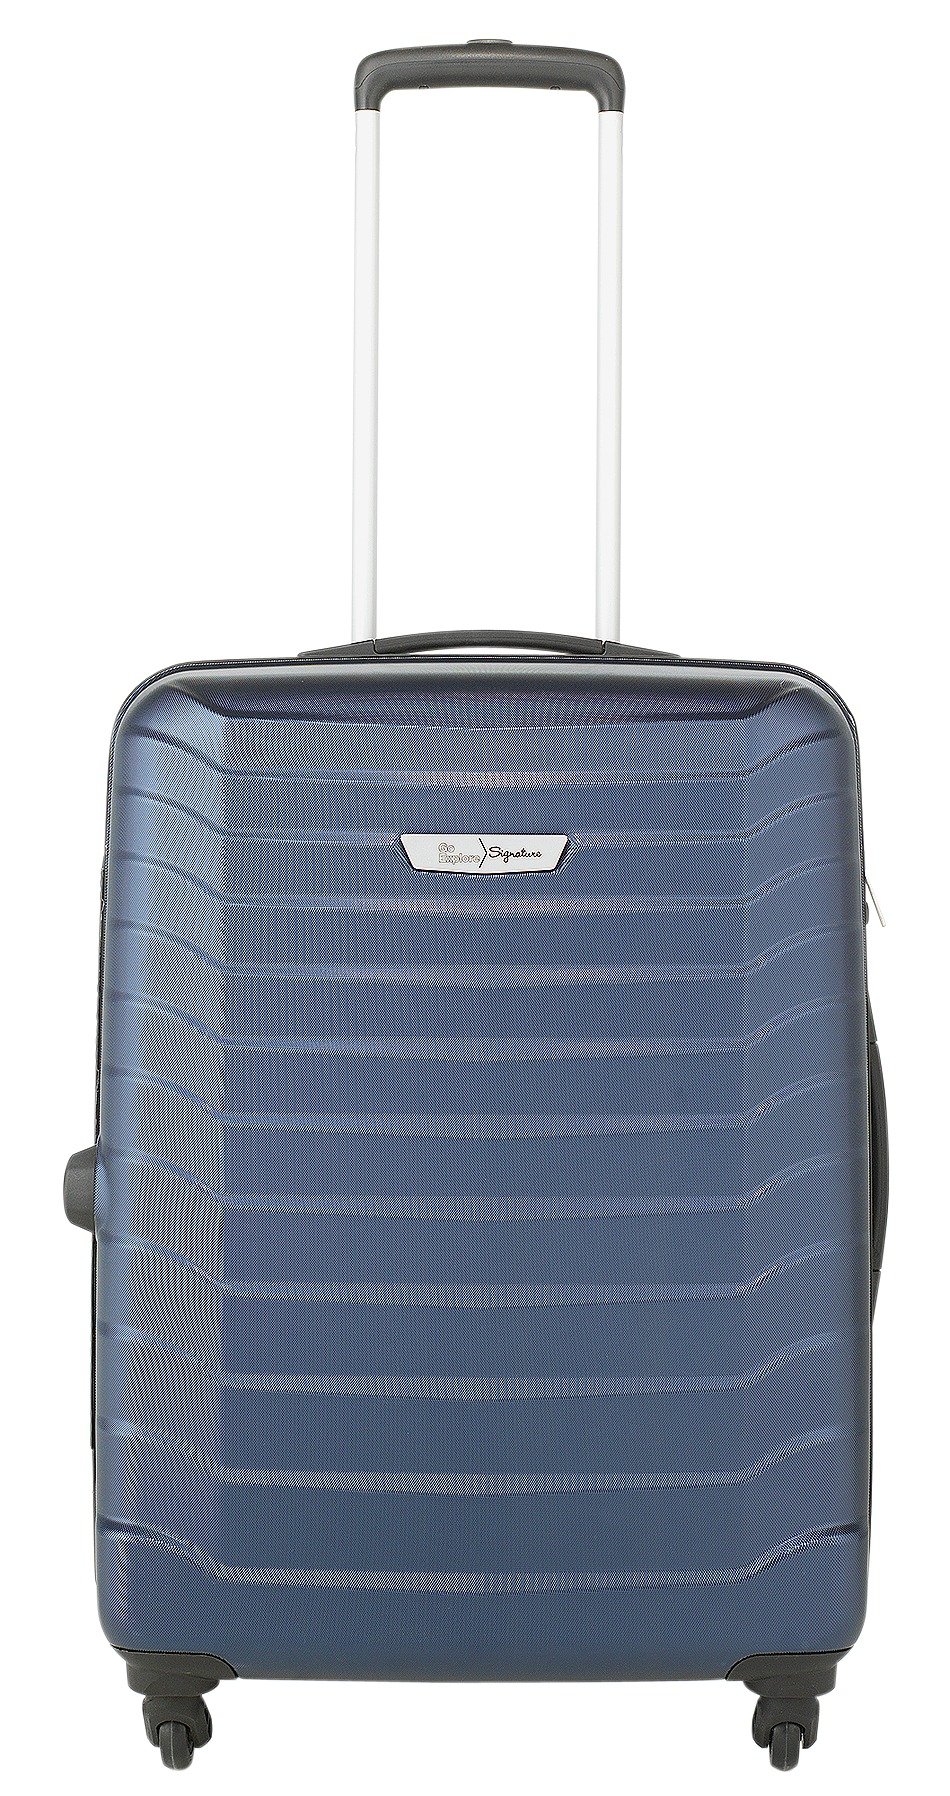 WOW Ultra-lightweight Hard 4 Wheel Suitcase ? Only at Argos Review